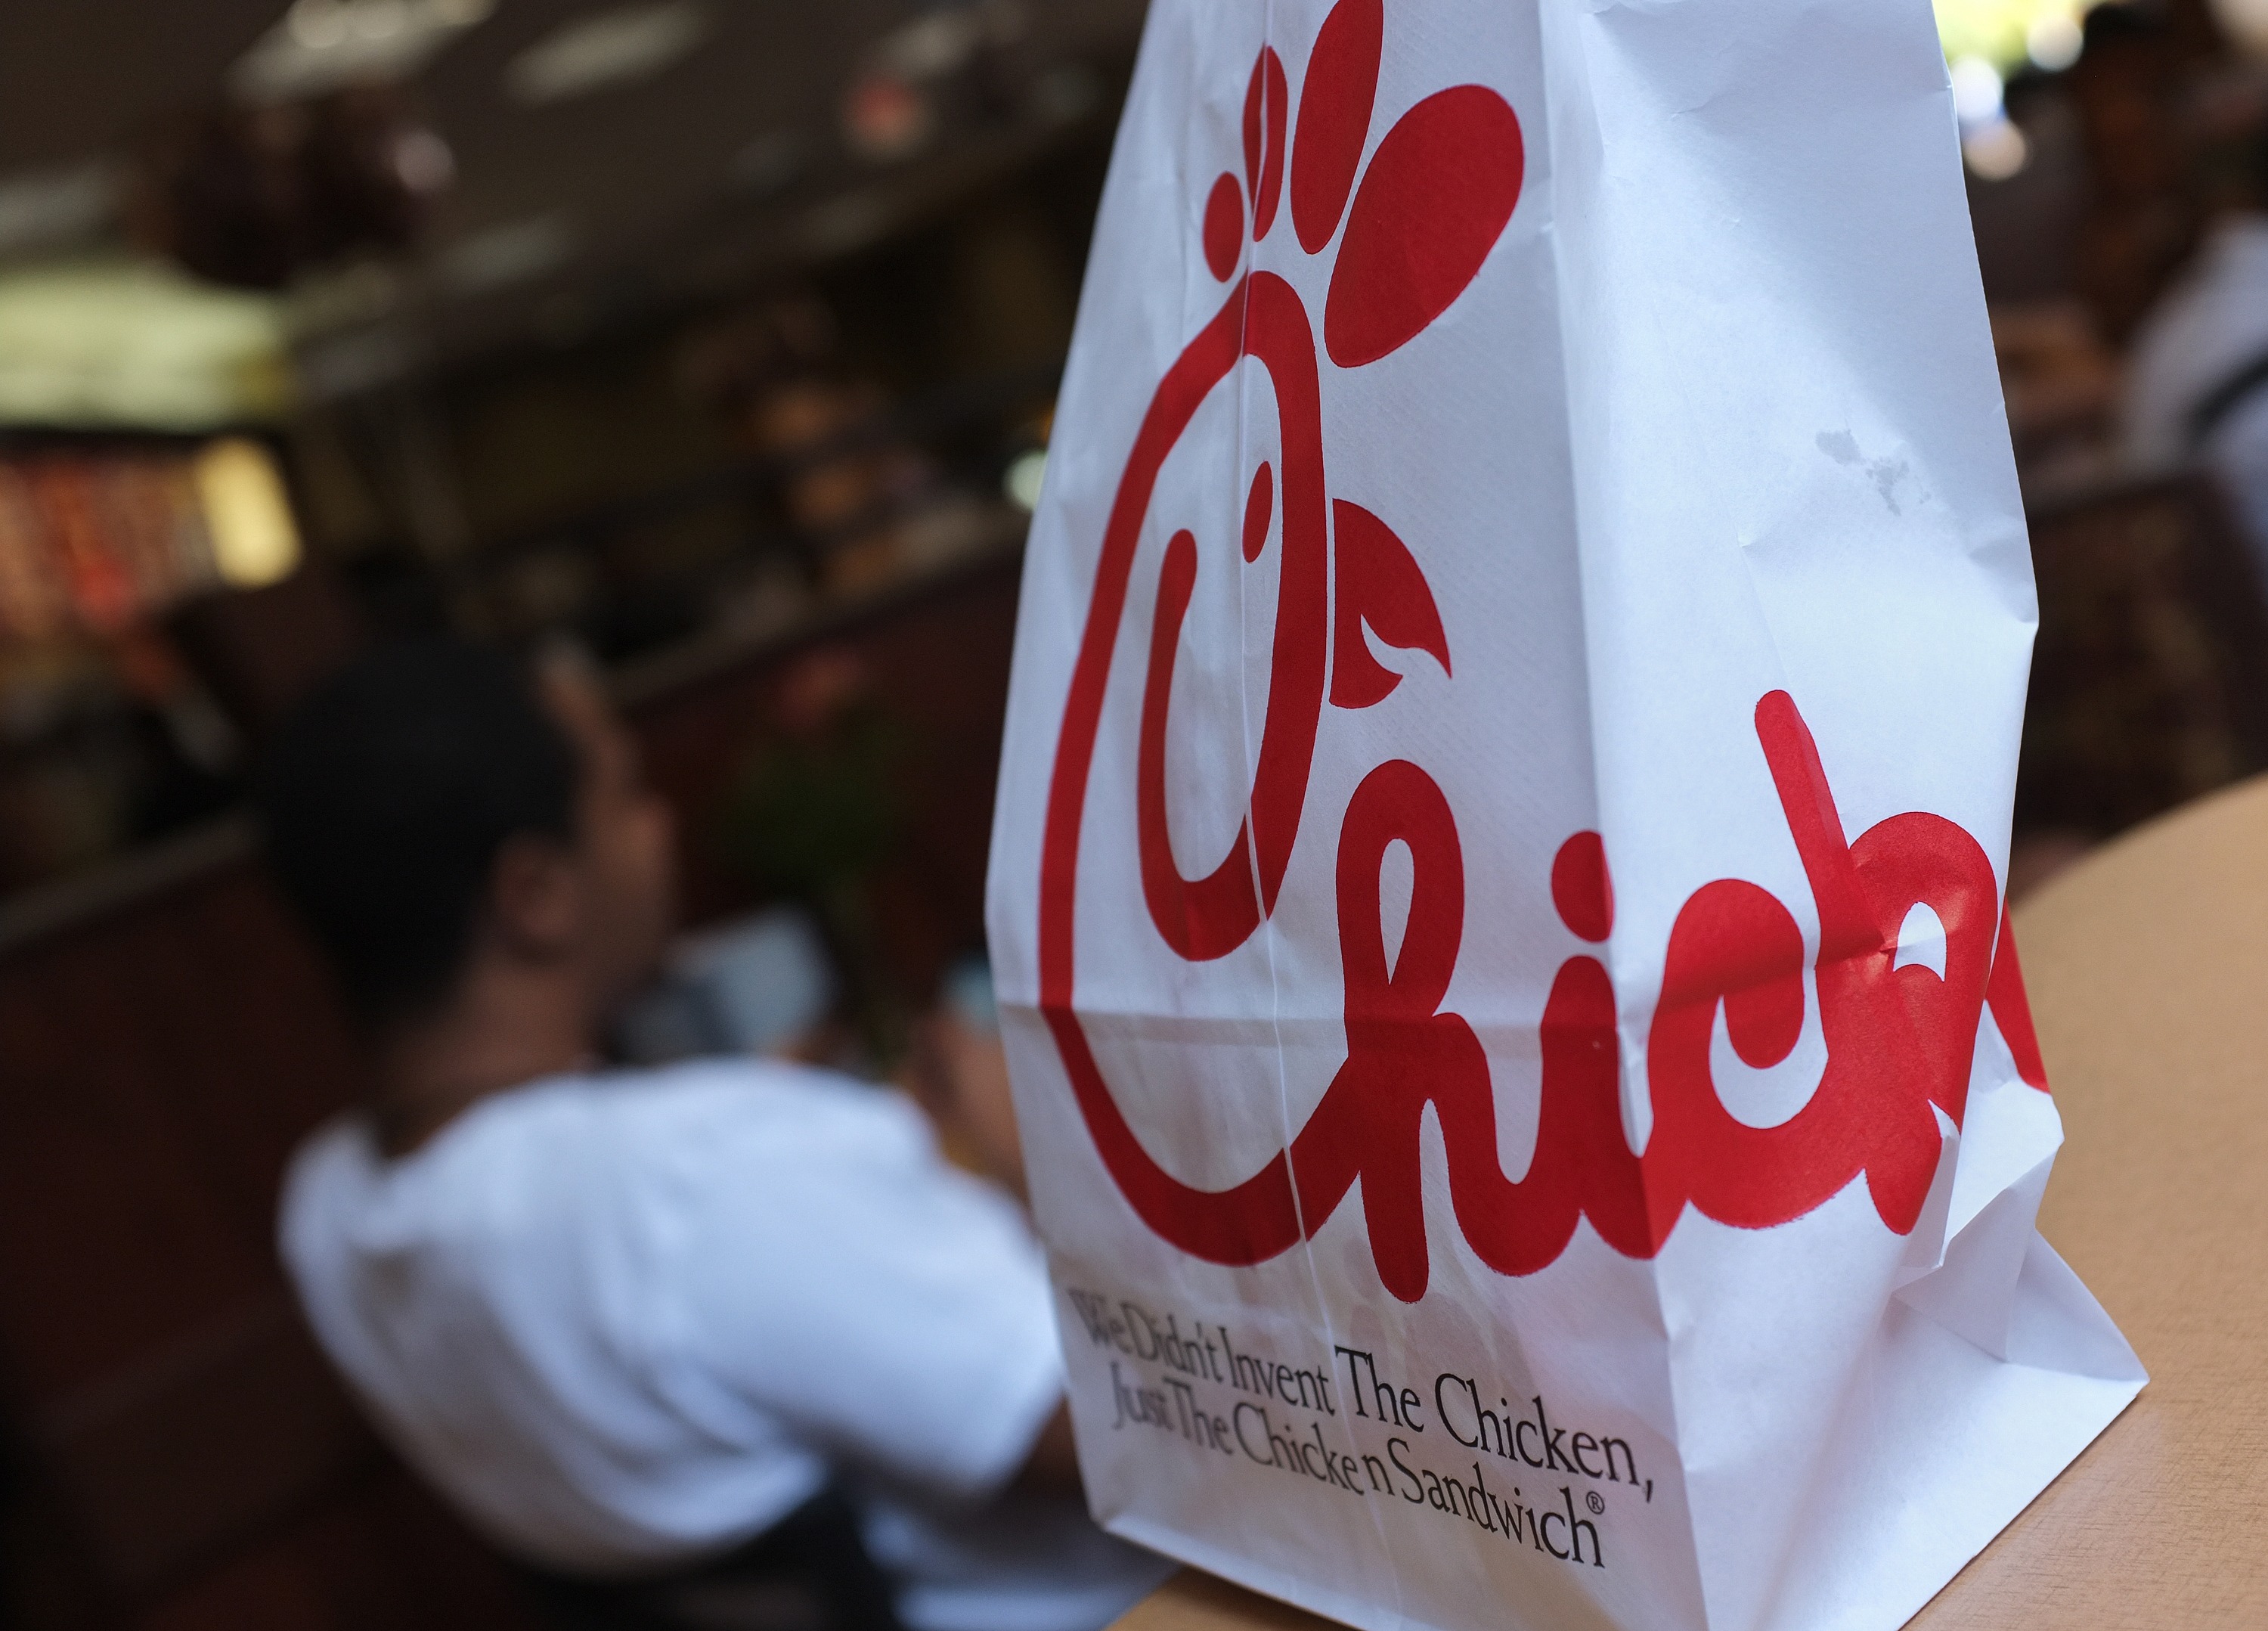 A Chick-fil-A logo is seen on a take out bag at one of its restaurants on July 28, 2012 in Bethesda, Maryland. Chick-fil-A, with more than 1,600 outlets mainly in the southern United States, has become the target of gay rights activists and their allies after president Dan Cathy came out against same-sex marriage last week. (MANDEL NGAN/AFP/GettyImages)